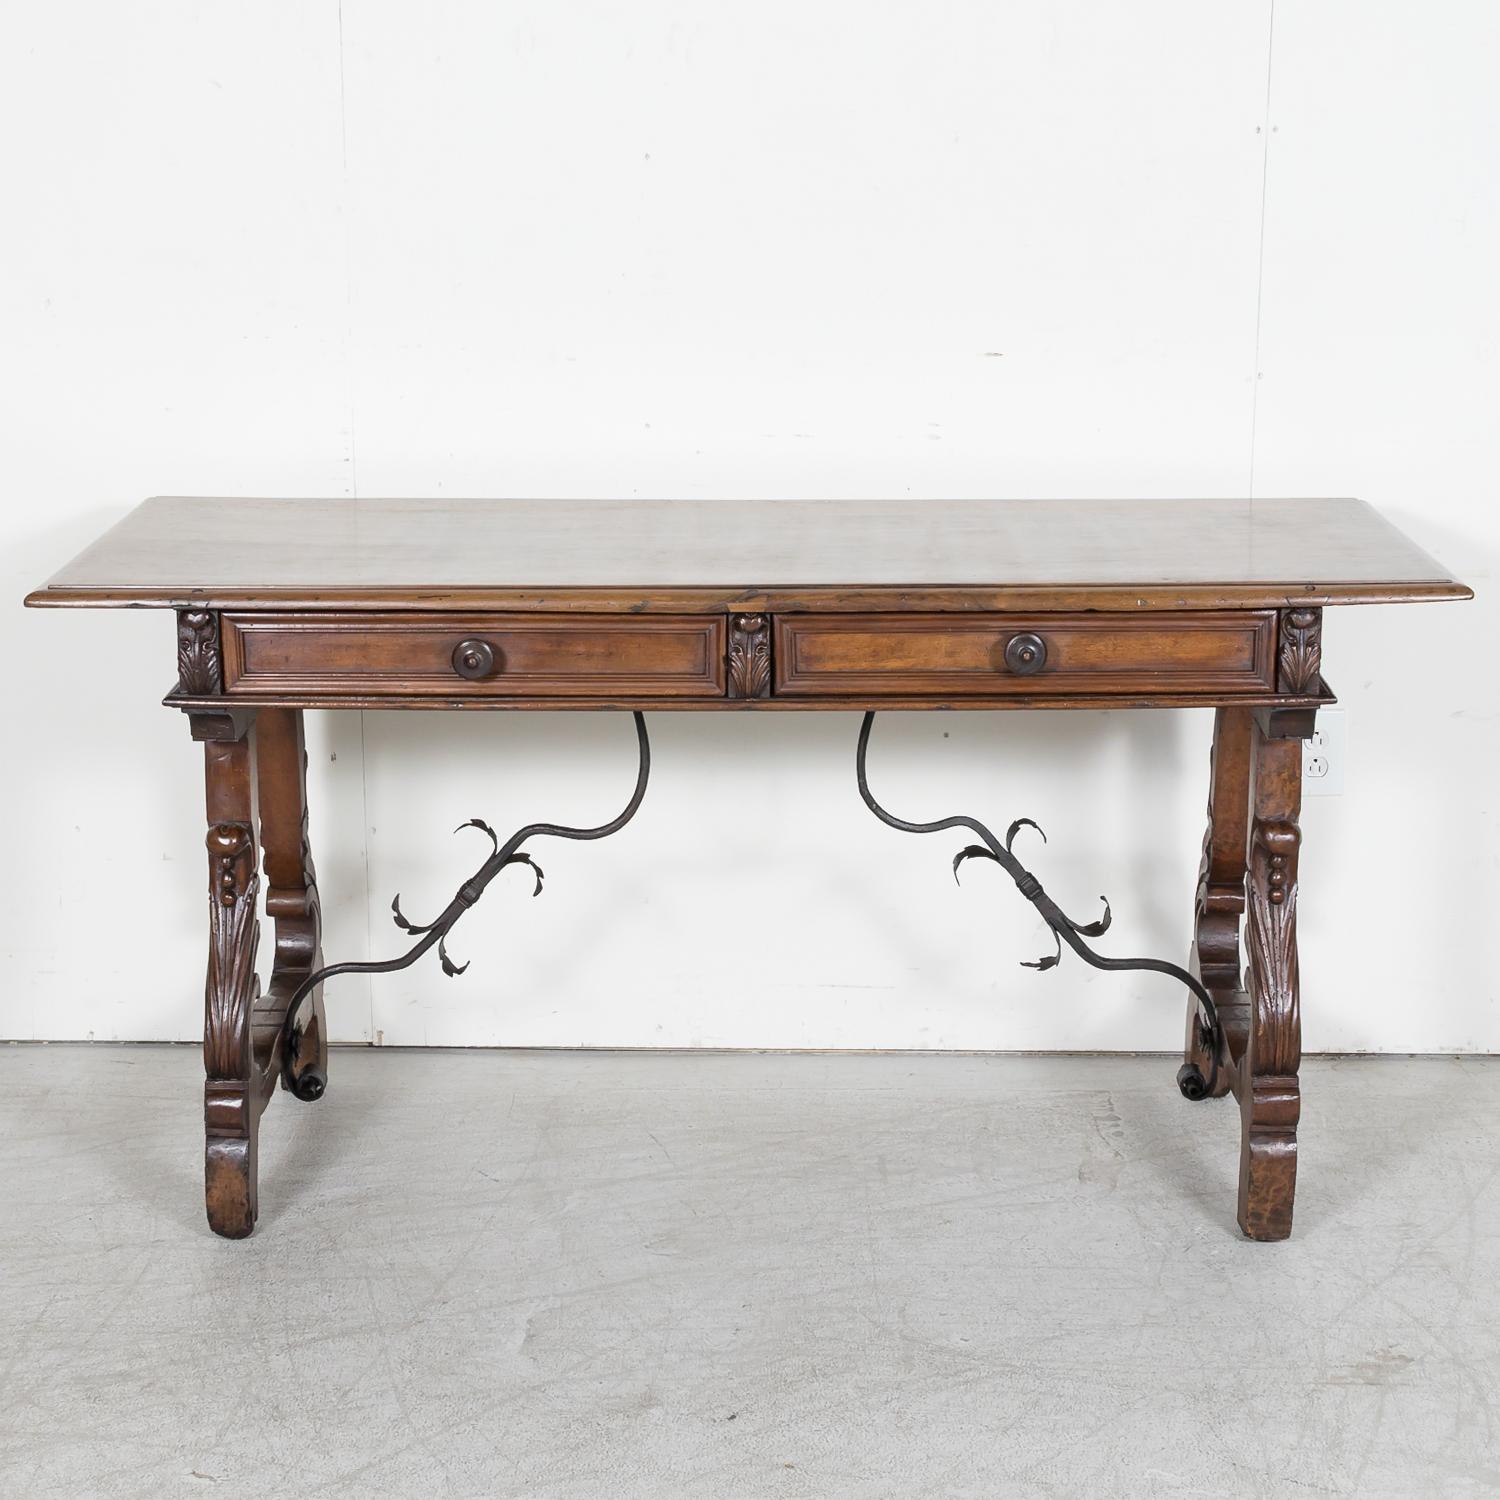 Forged 19th Century Italian Baroque Style Walnut Fratino Console Table with Drawers